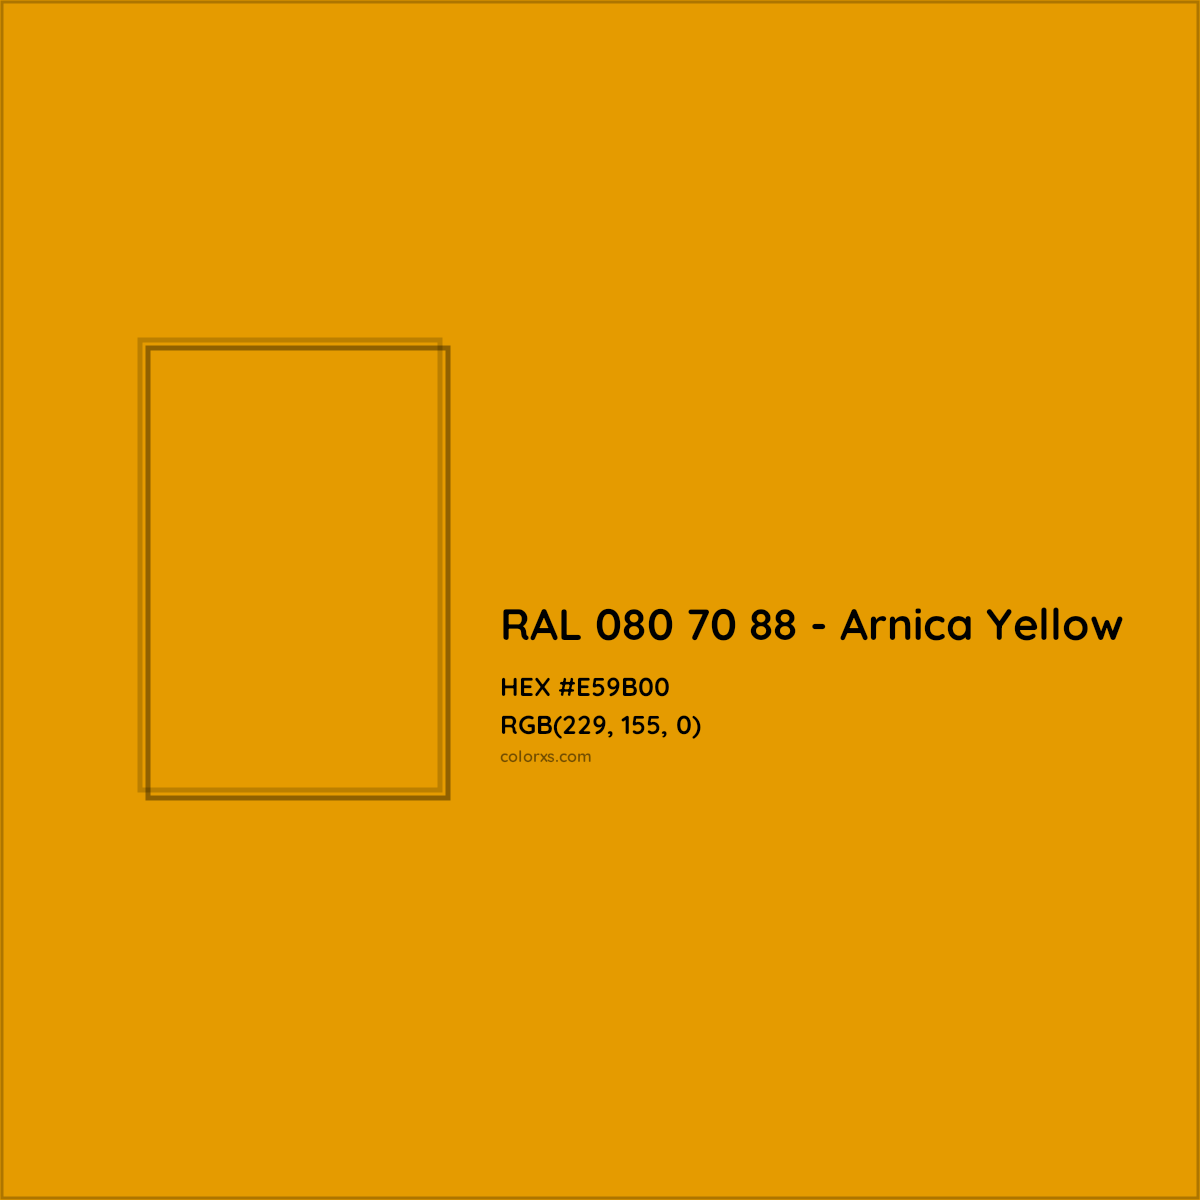 HEX #E59B00 RAL 080 70 88 - Arnica Yellow CMS RAL Design - Color Code